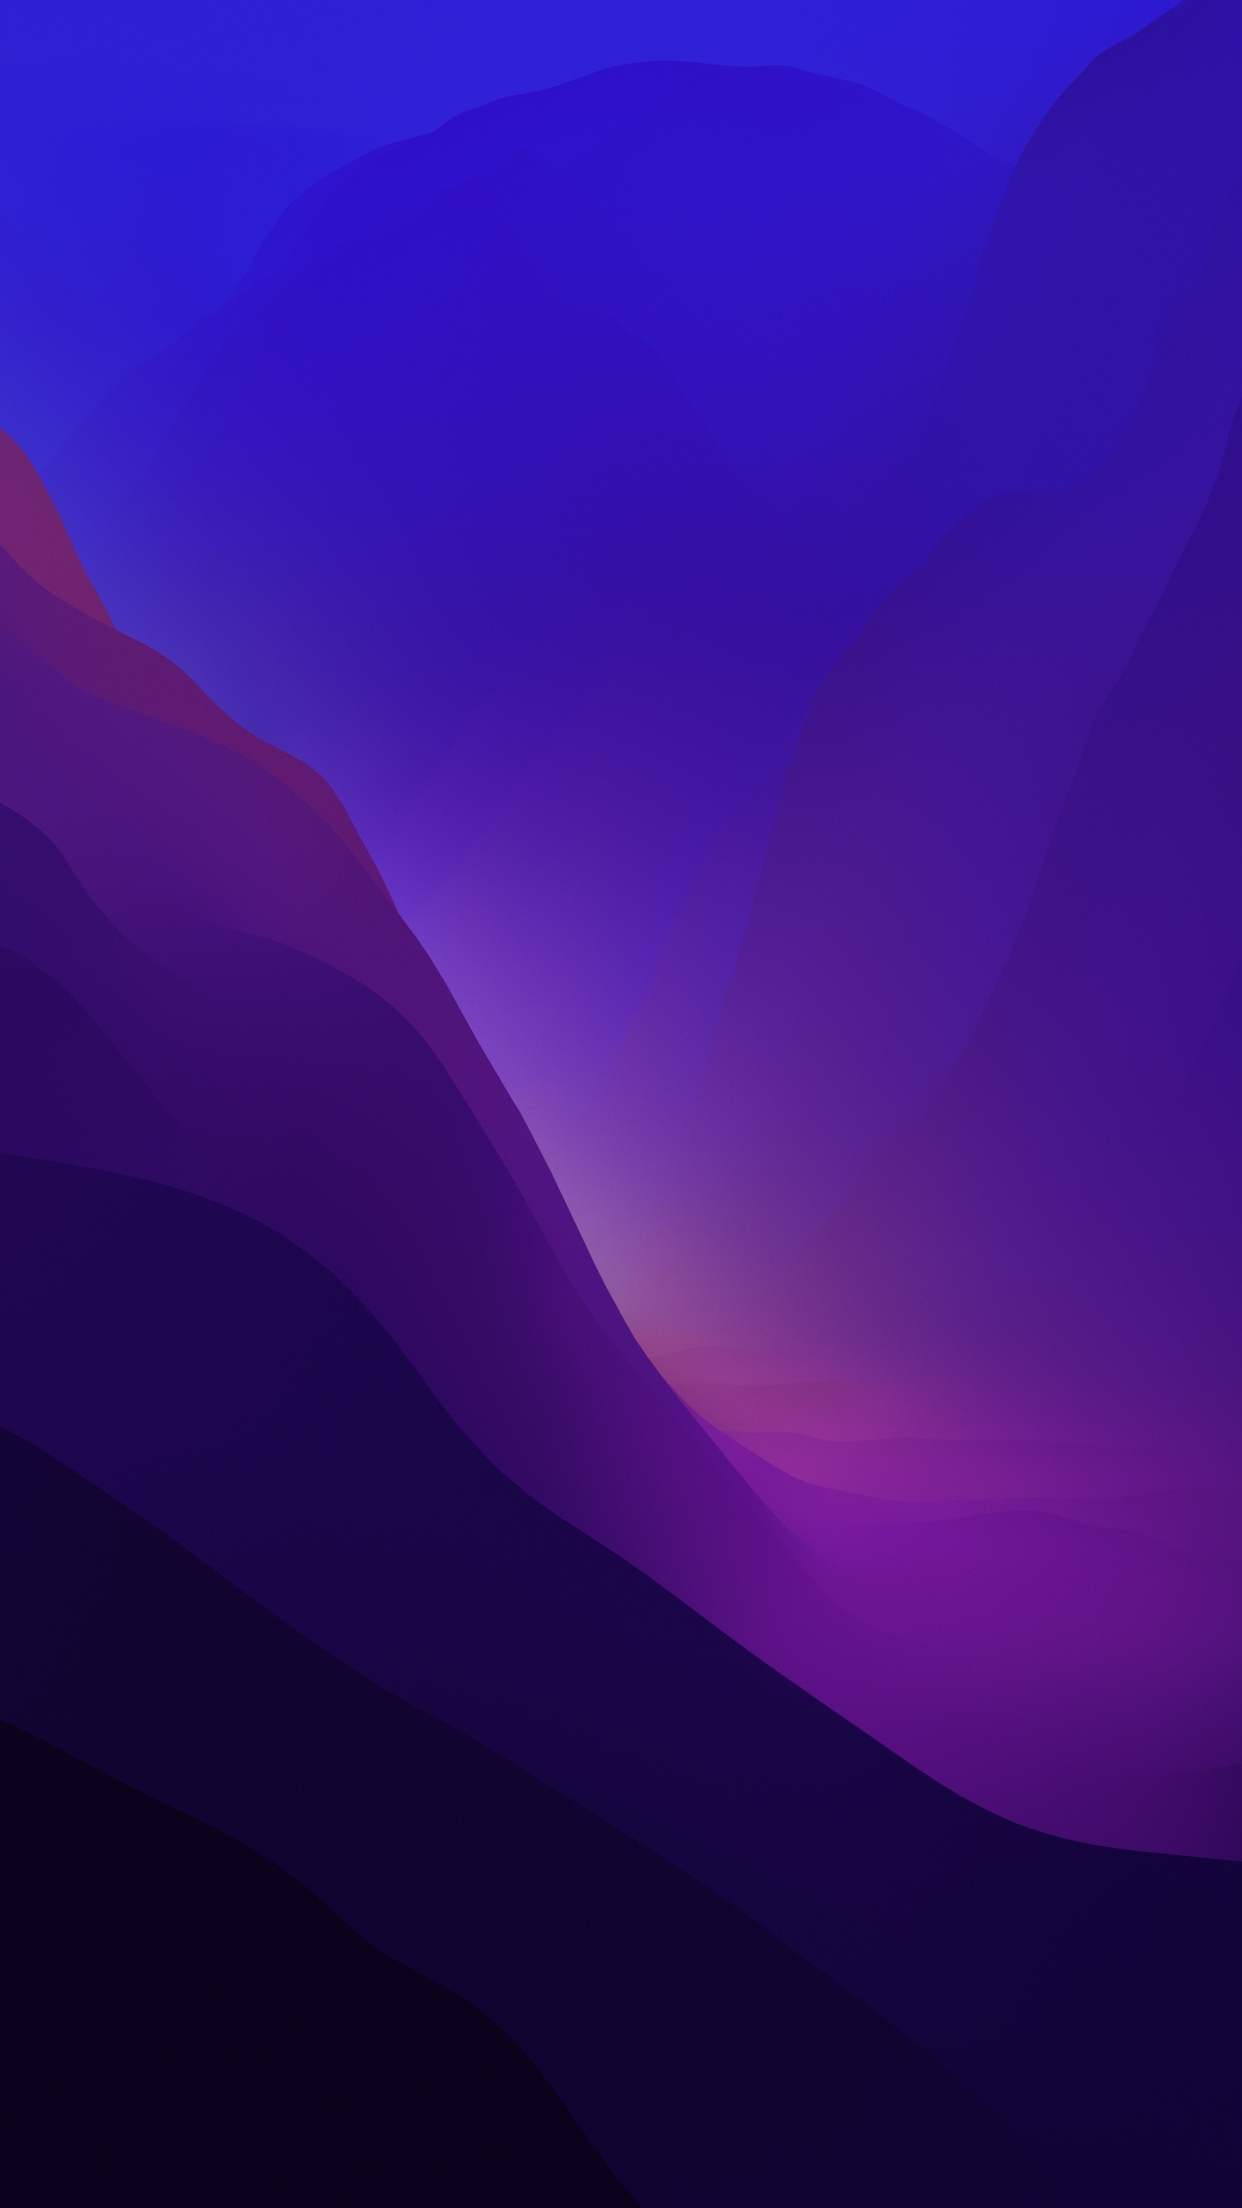 Is it possible to create custom Light/Dark wallpapers for iOS 13? : r/ios